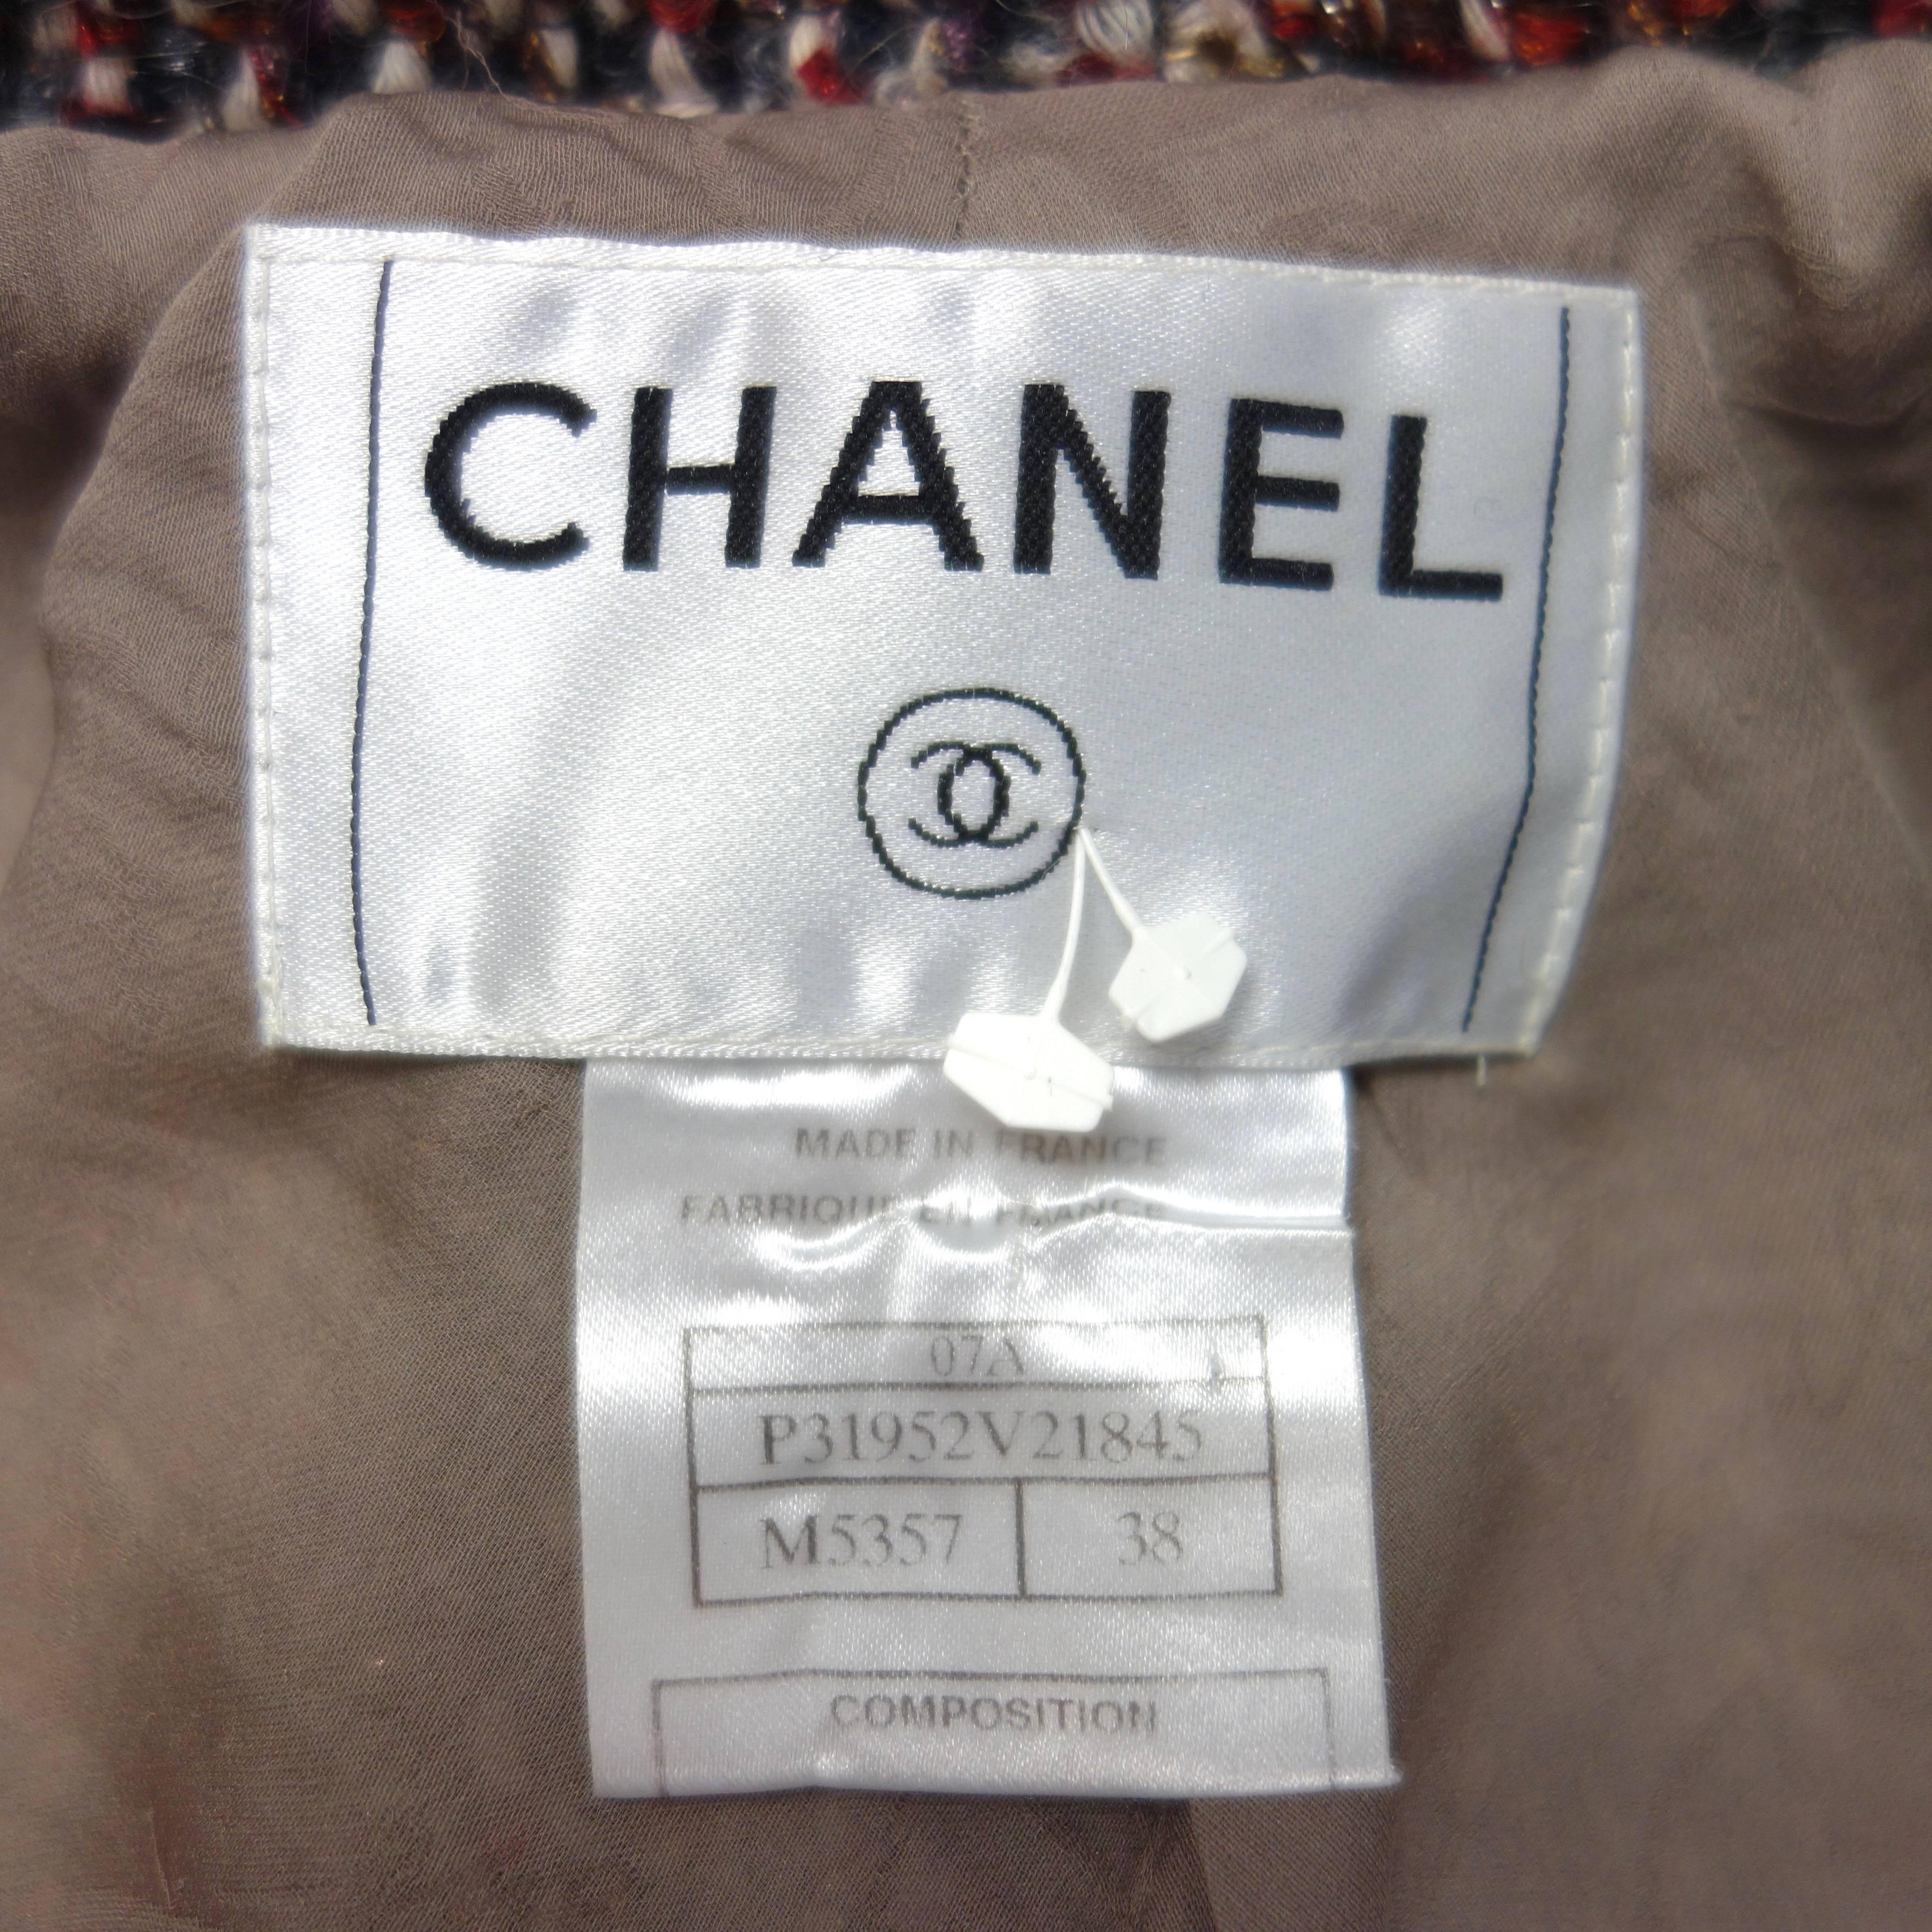 Chanel 07A Metallic-Flecked Boucle Tweed Suit Size 38 In Excellent Condition In Westlake Village, CA